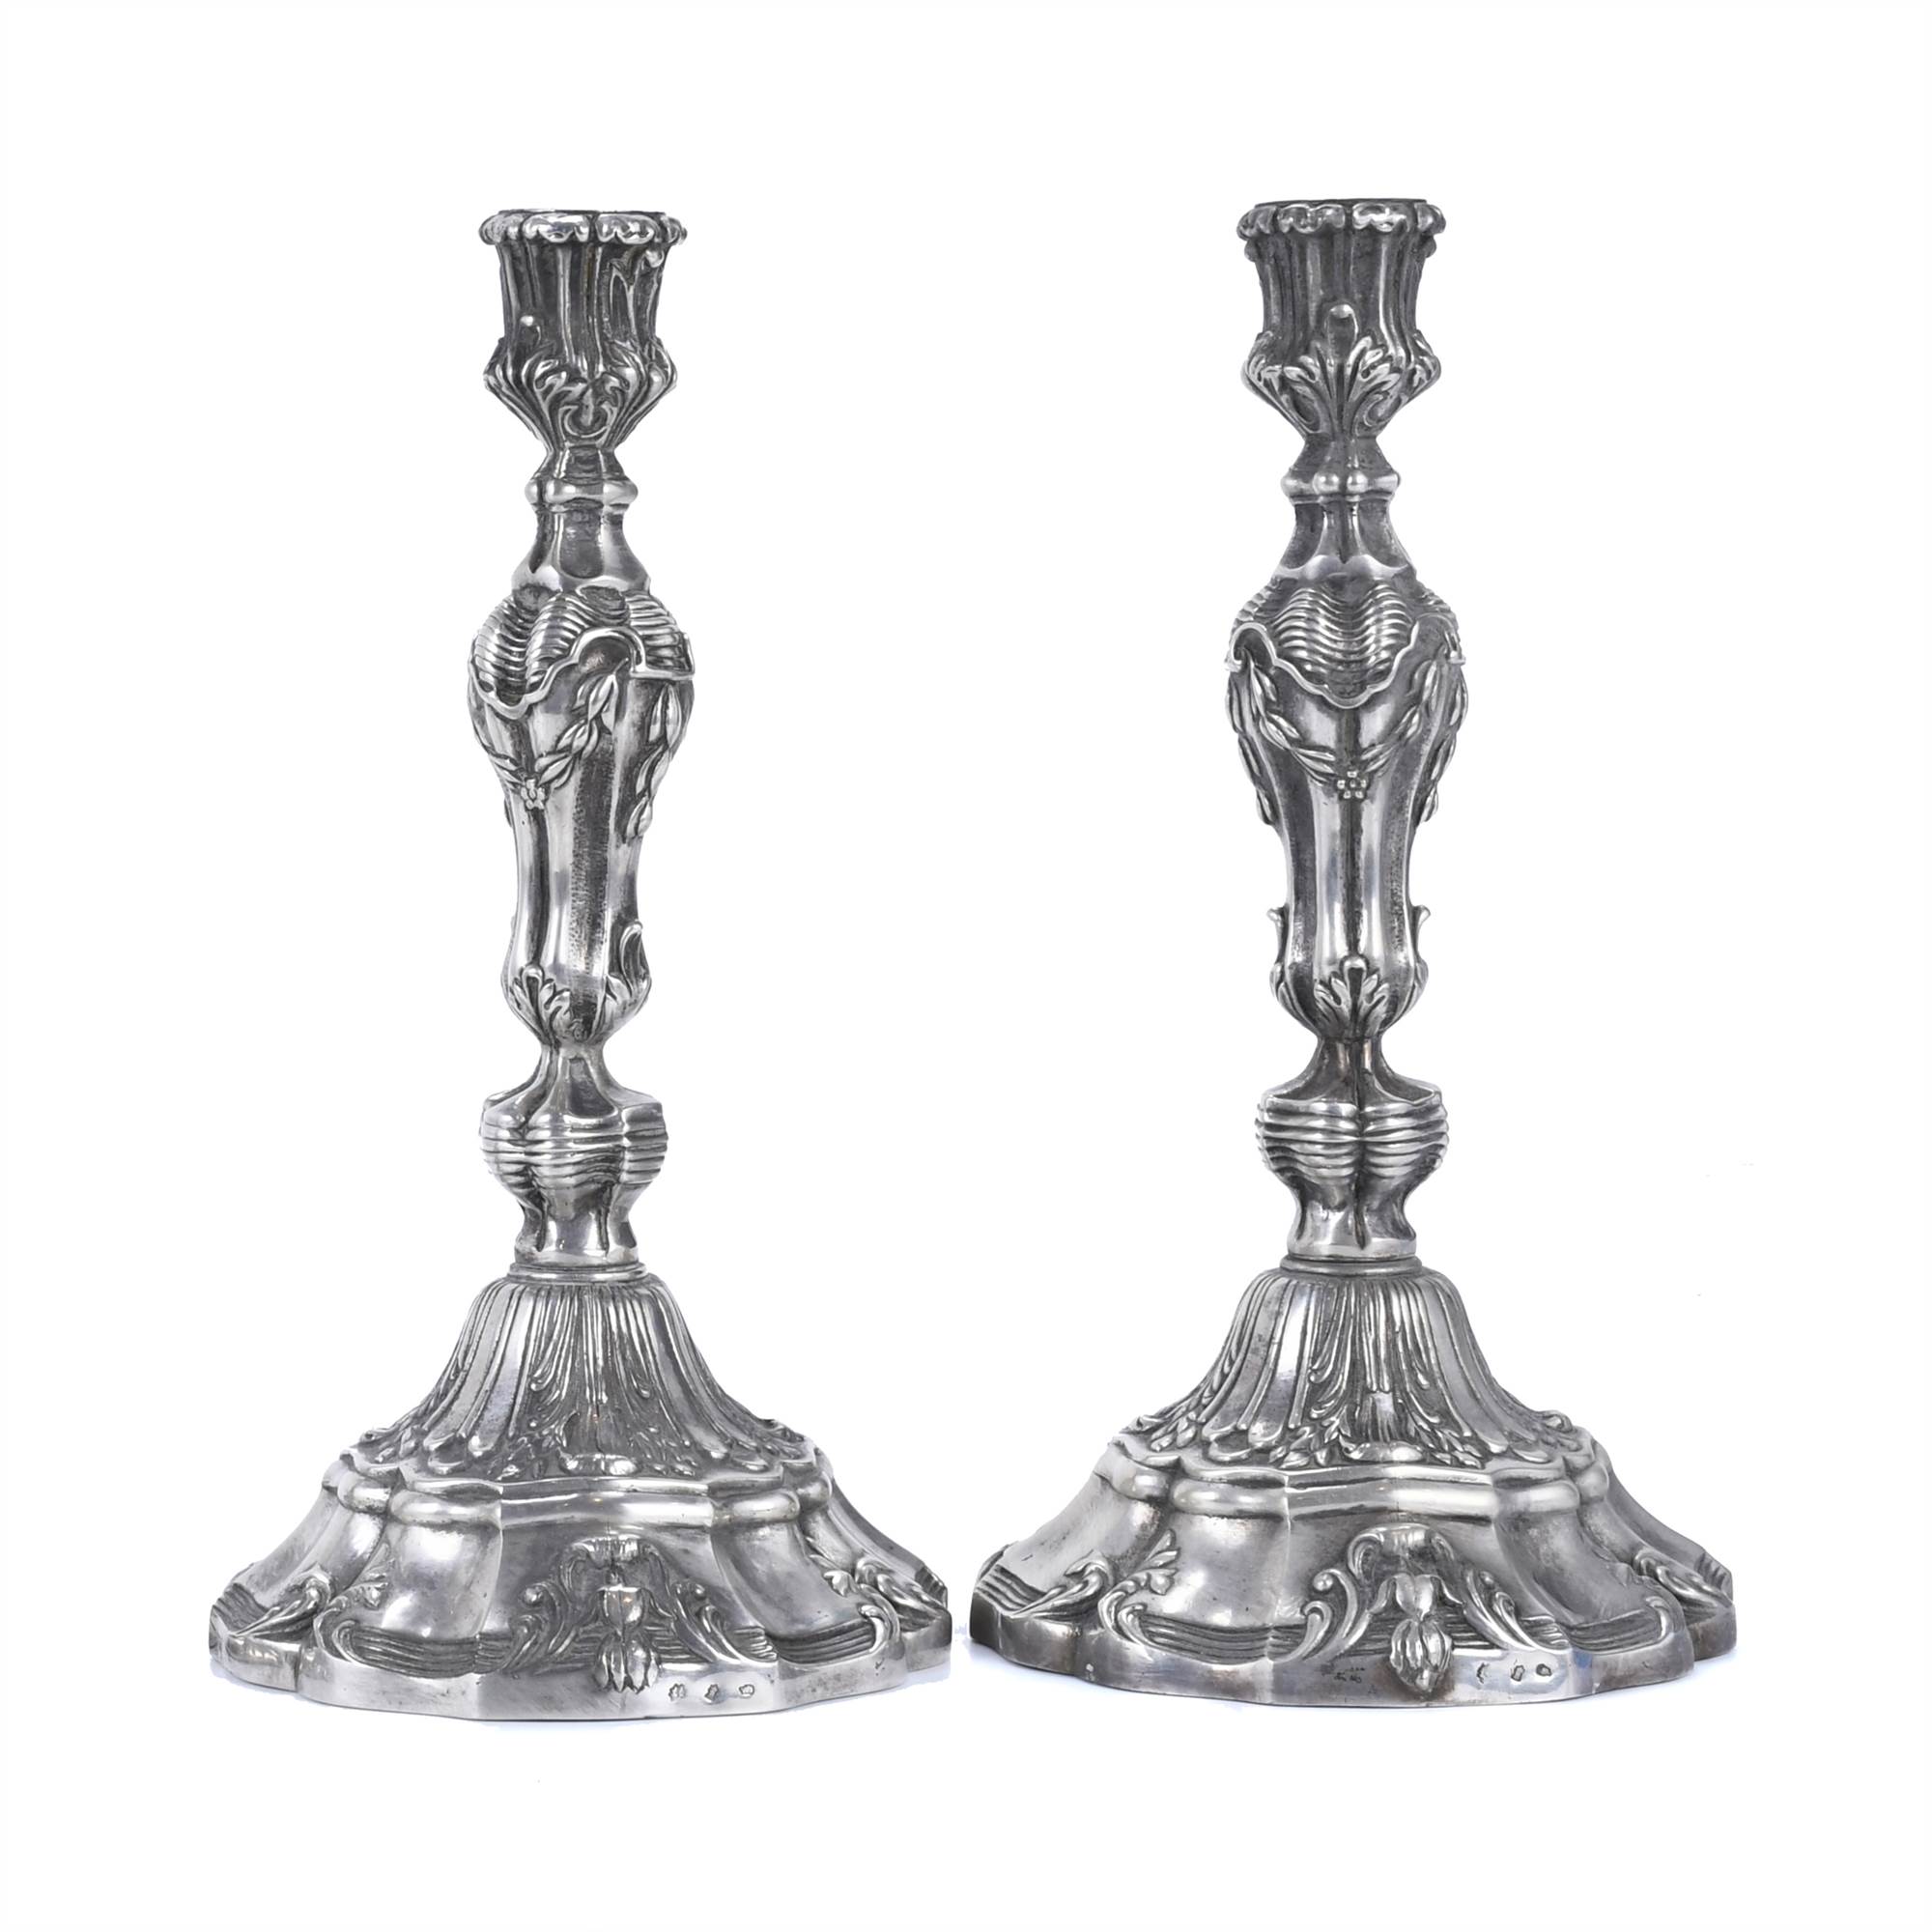 PAIR OF LOUIS XV STYLE SILVER CANDLESTICKS, PROBABLY FROM B